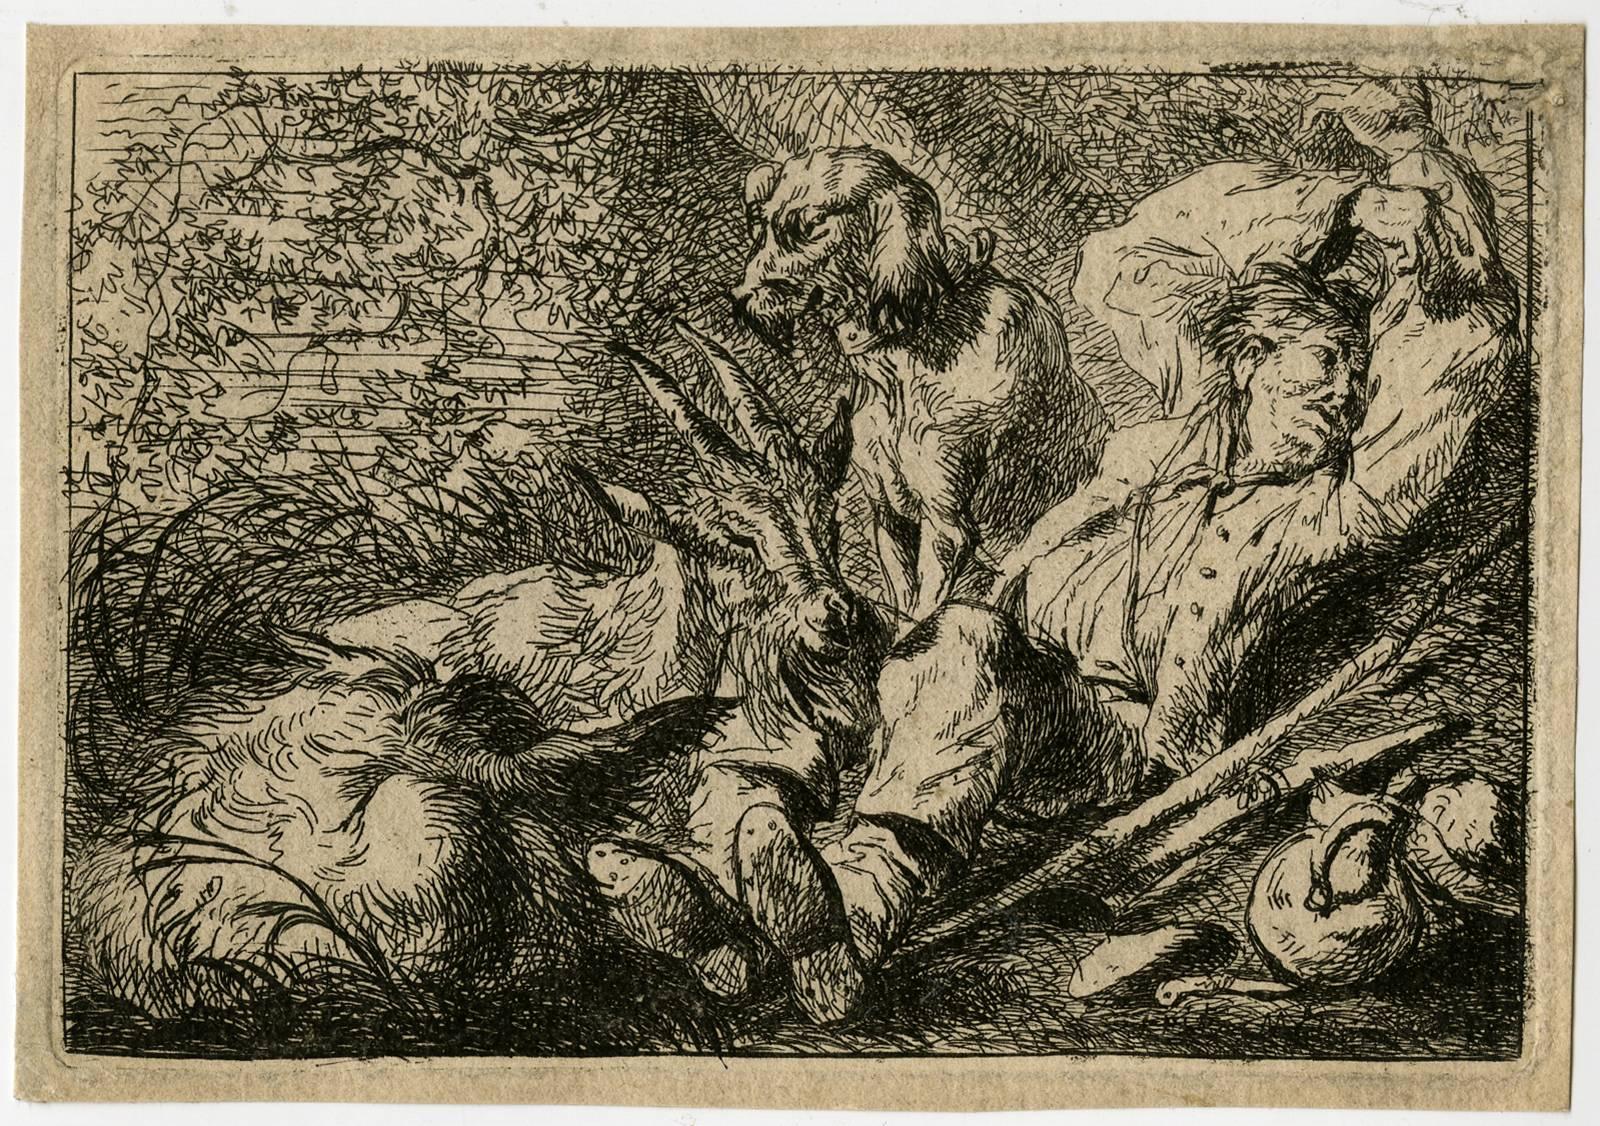 Friedrich Muller Figurative Print - Untitled - A sleeping shepherd with his dog and goats.